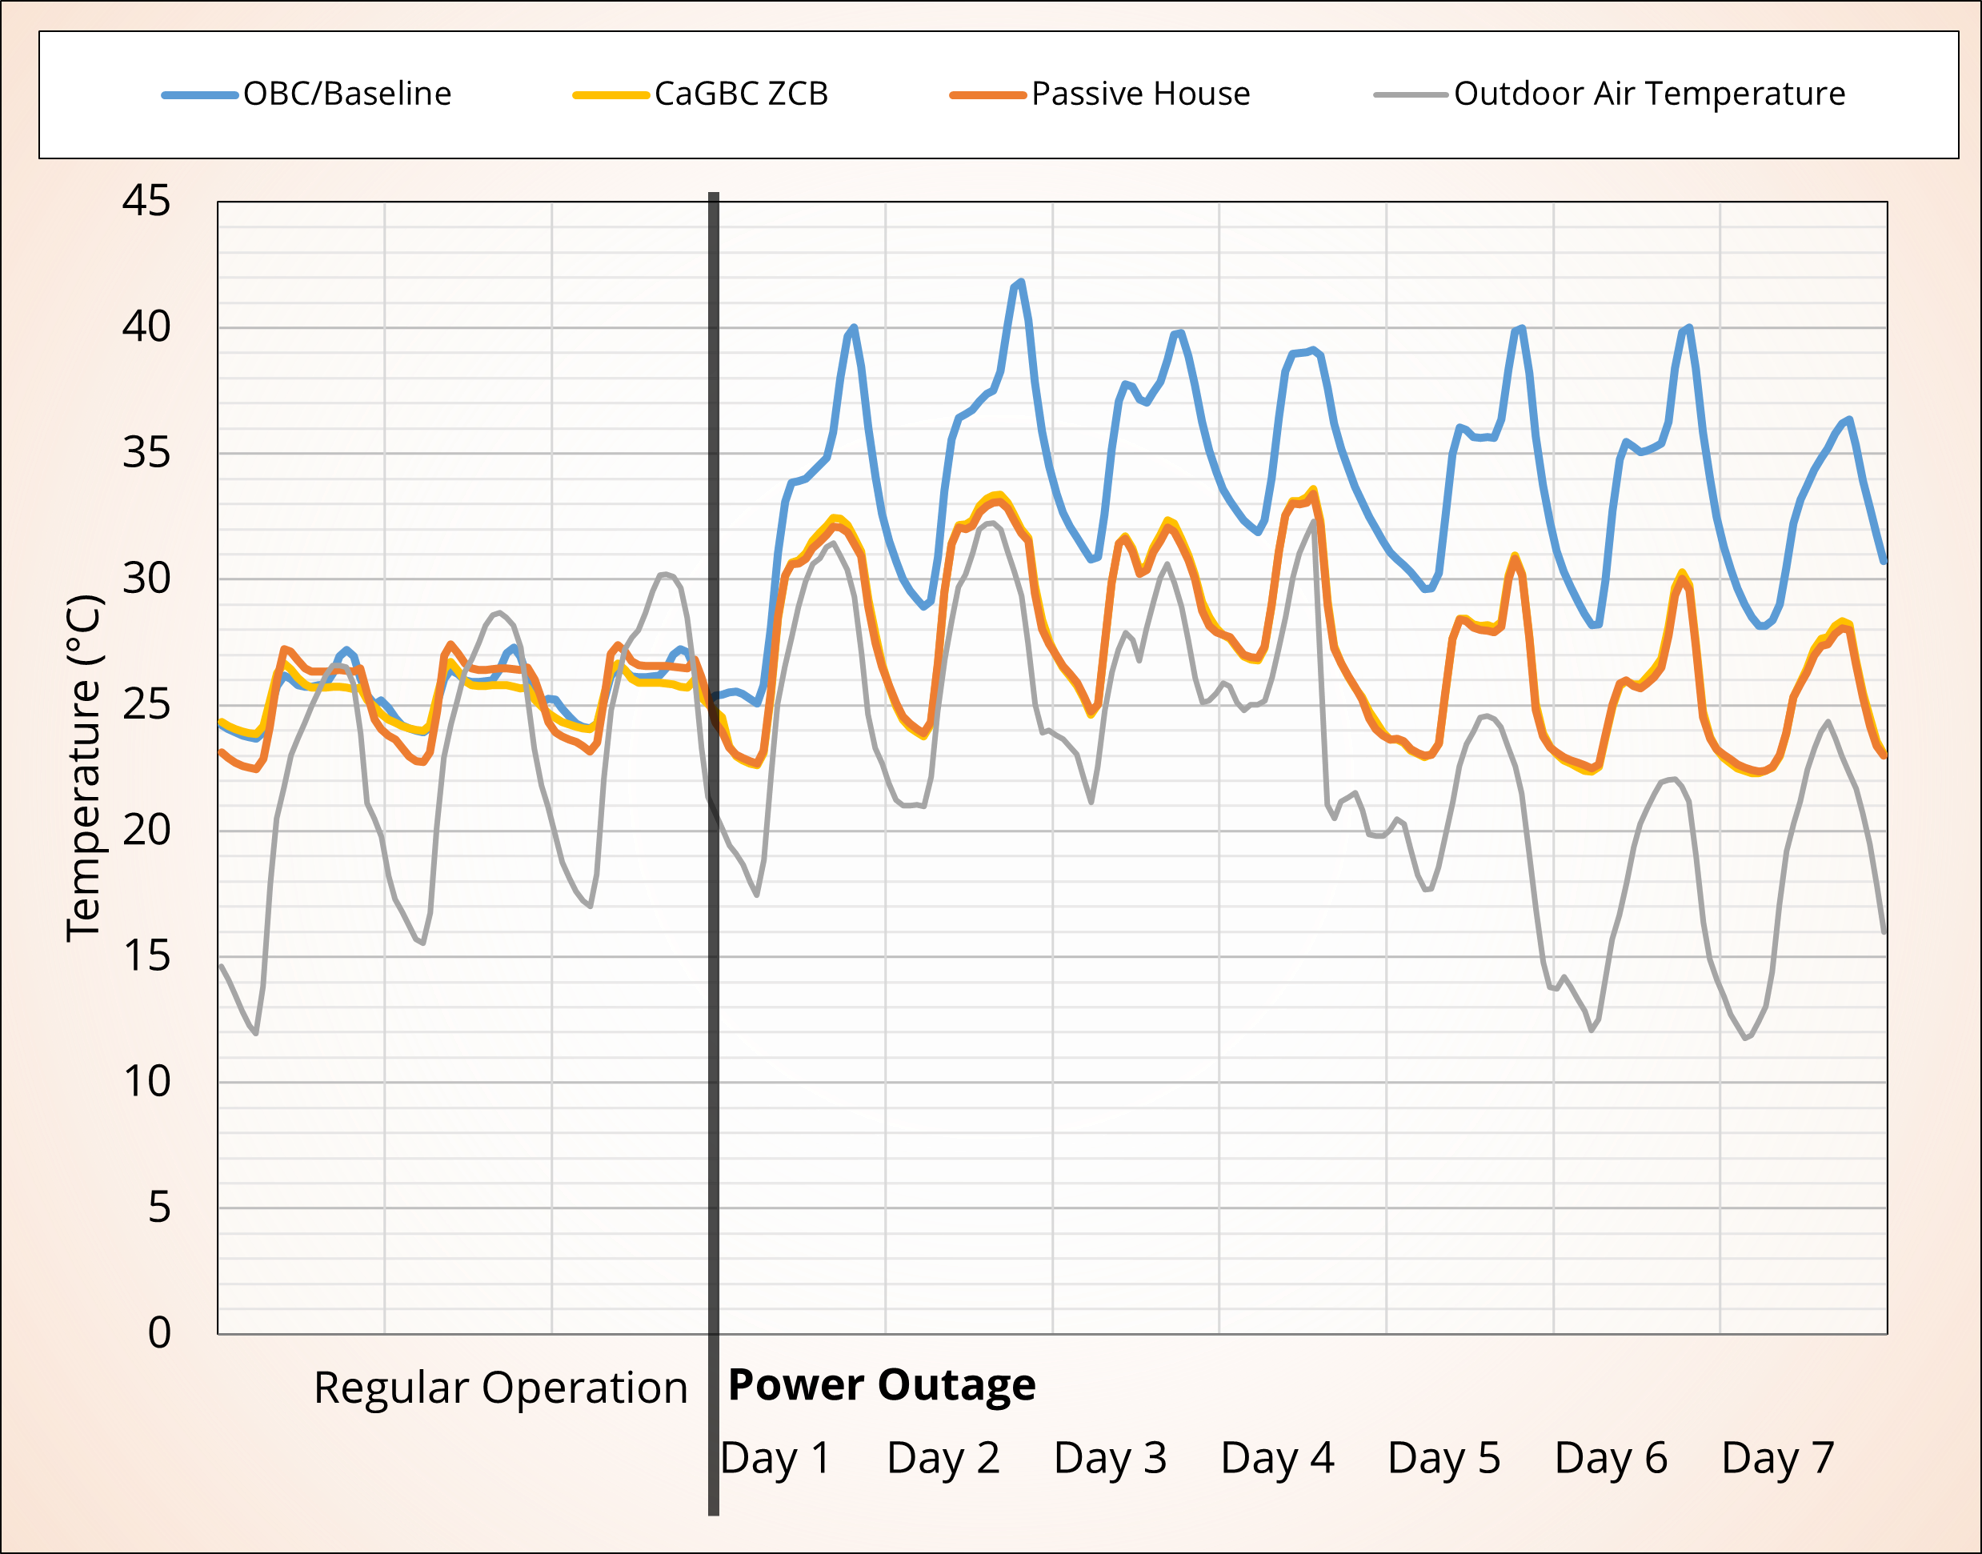 Operative Temperatures During Summer Power Outage